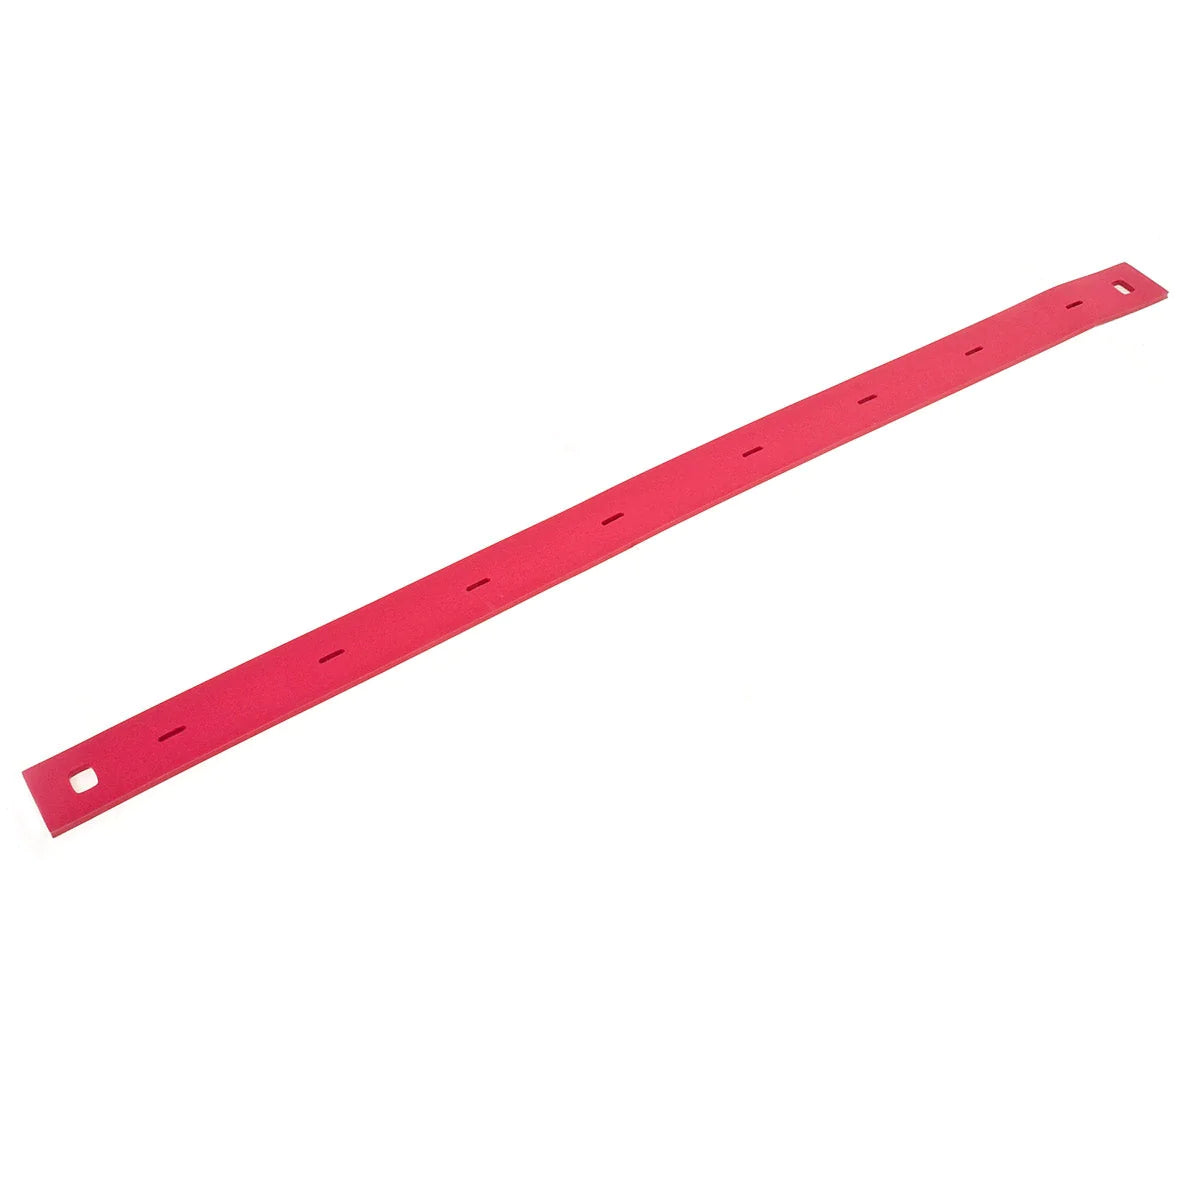 Clarke CA30 20B, Viper AS5160 and AS510 scrubber dryer polyurethane front squeegee blade